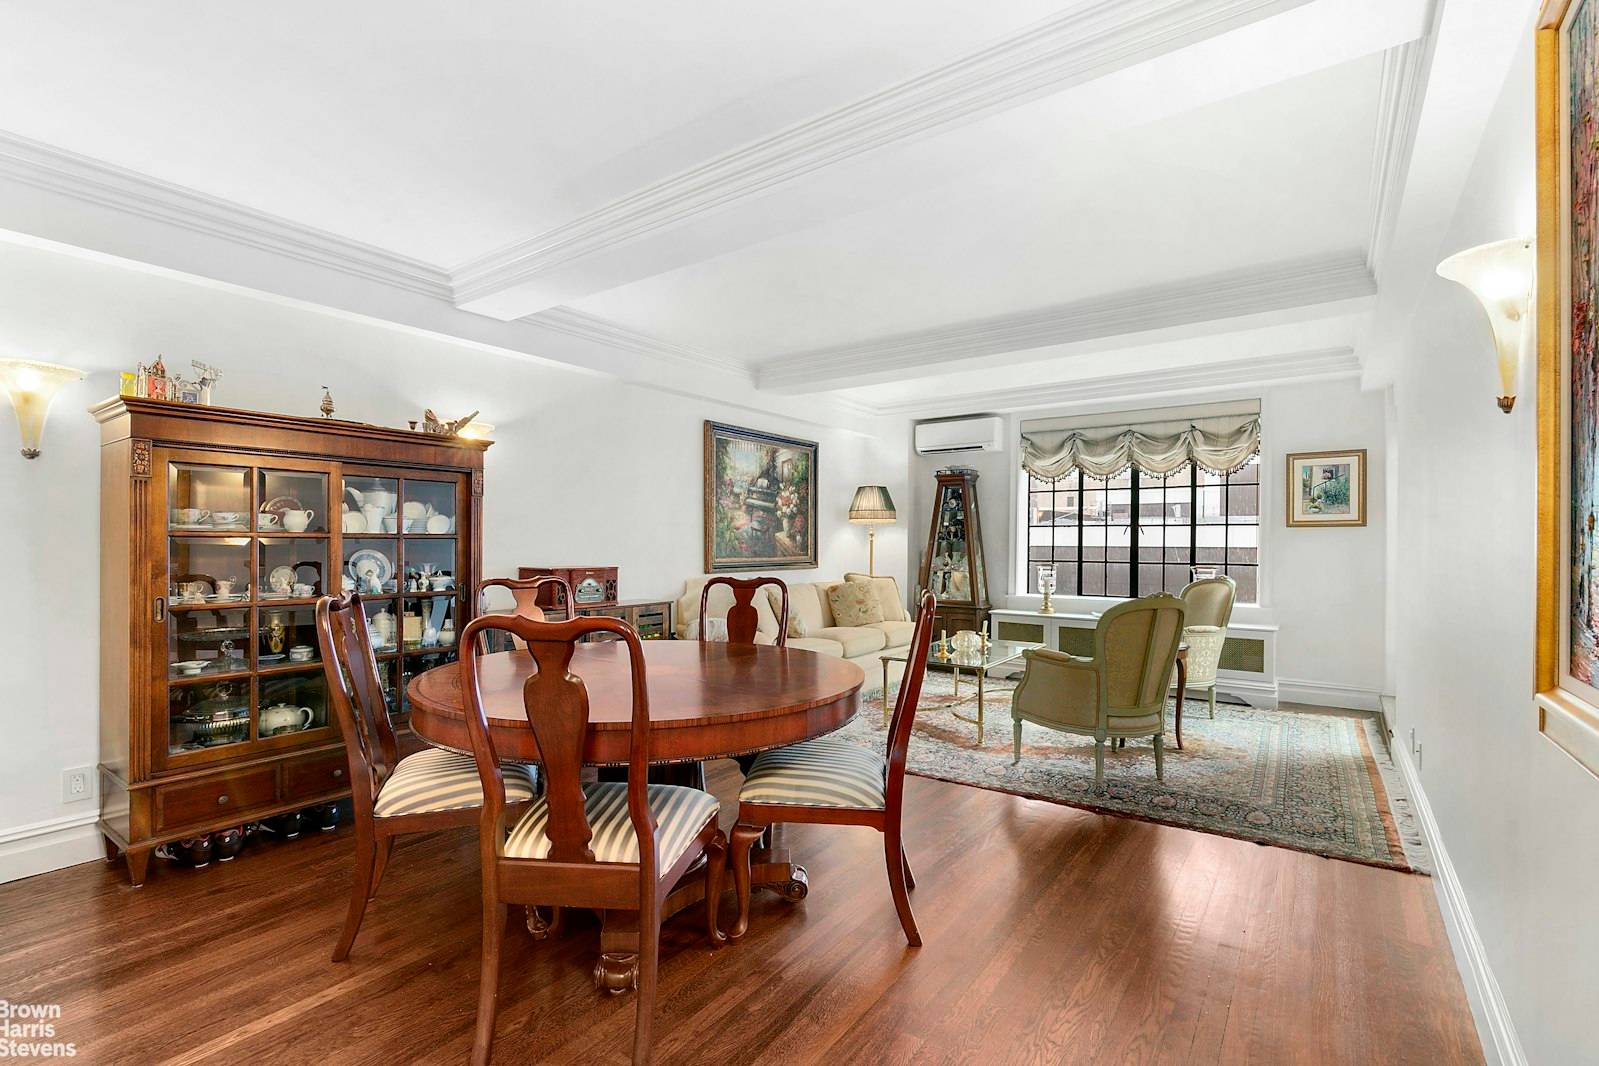 Delight in the upscale living that Manhattan is known for, with this impeccably appointed and sun drenched 2 bed 2 bath co operative at 227 East 57th Street.